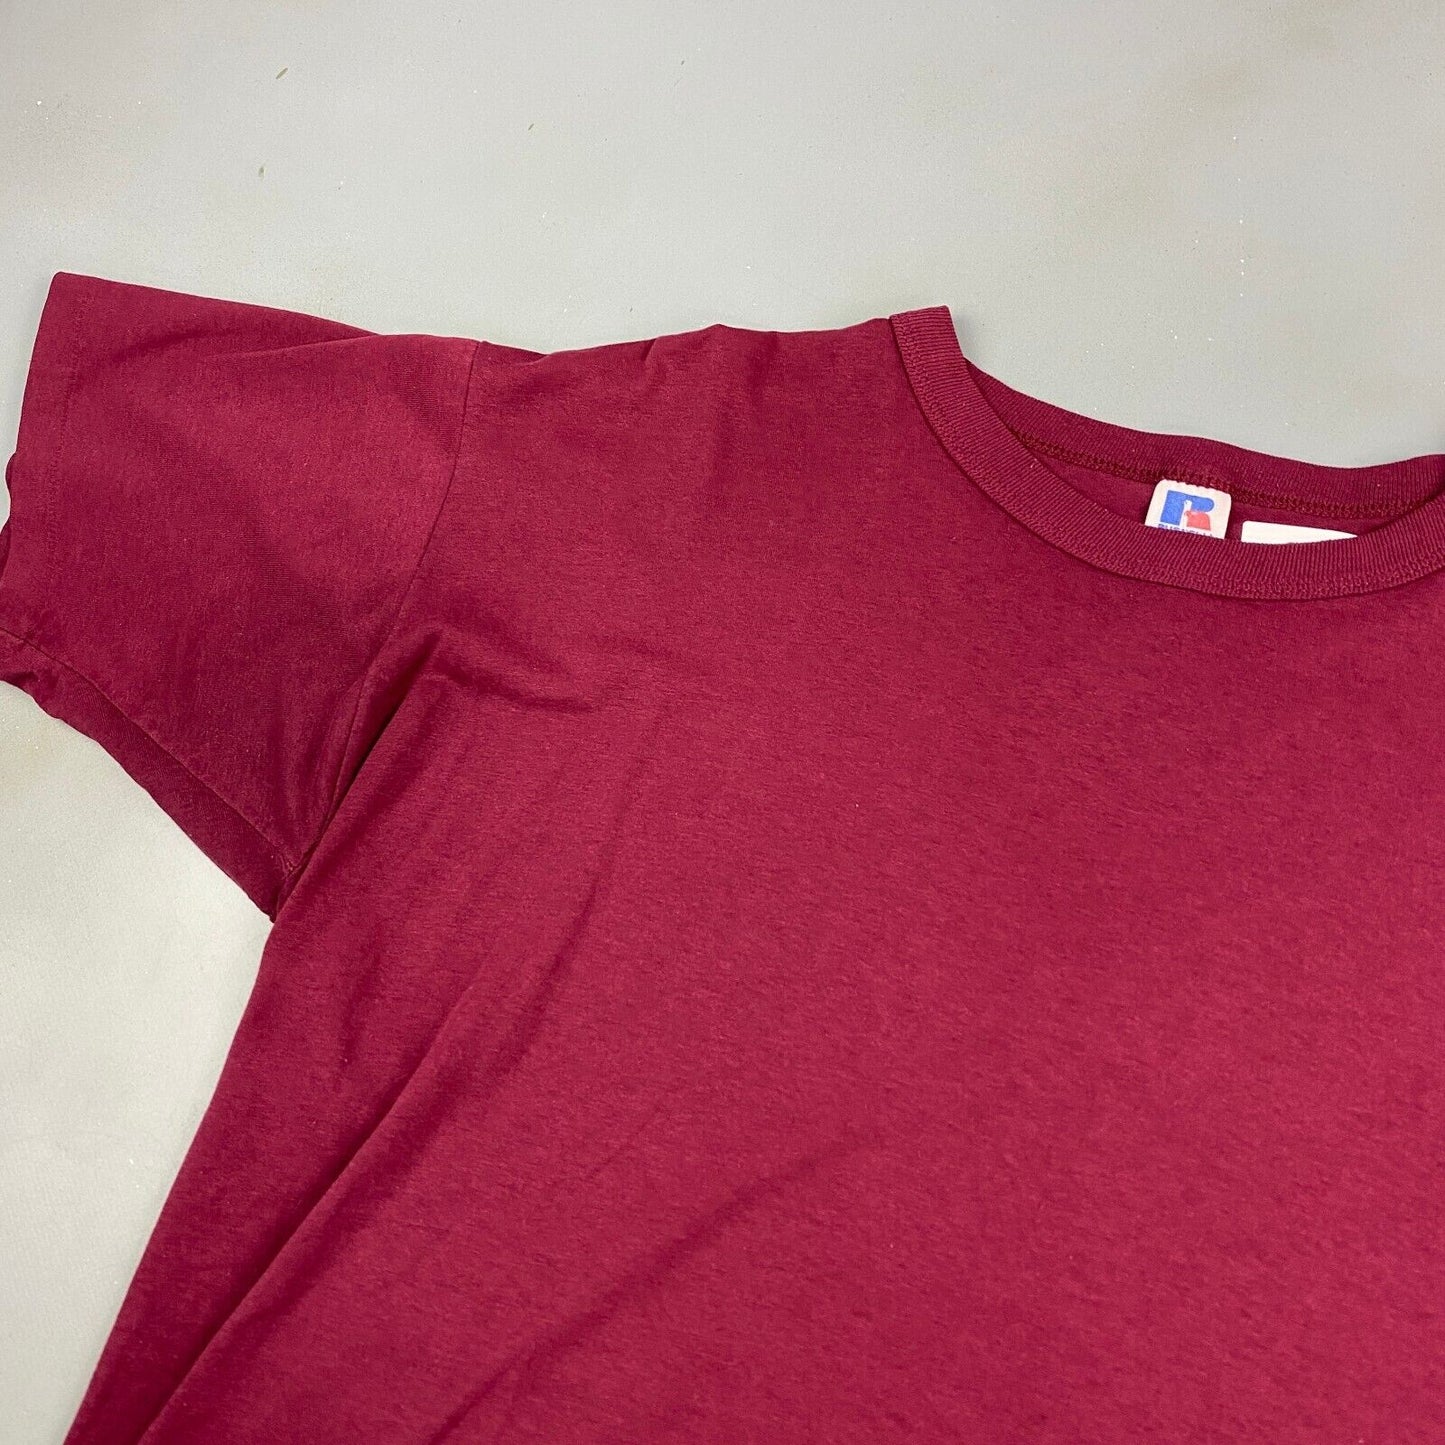 VINTAGE 90s Russell Athletic Faded Maroon Blank T-Shirt MadeinUSA sz XXL Men